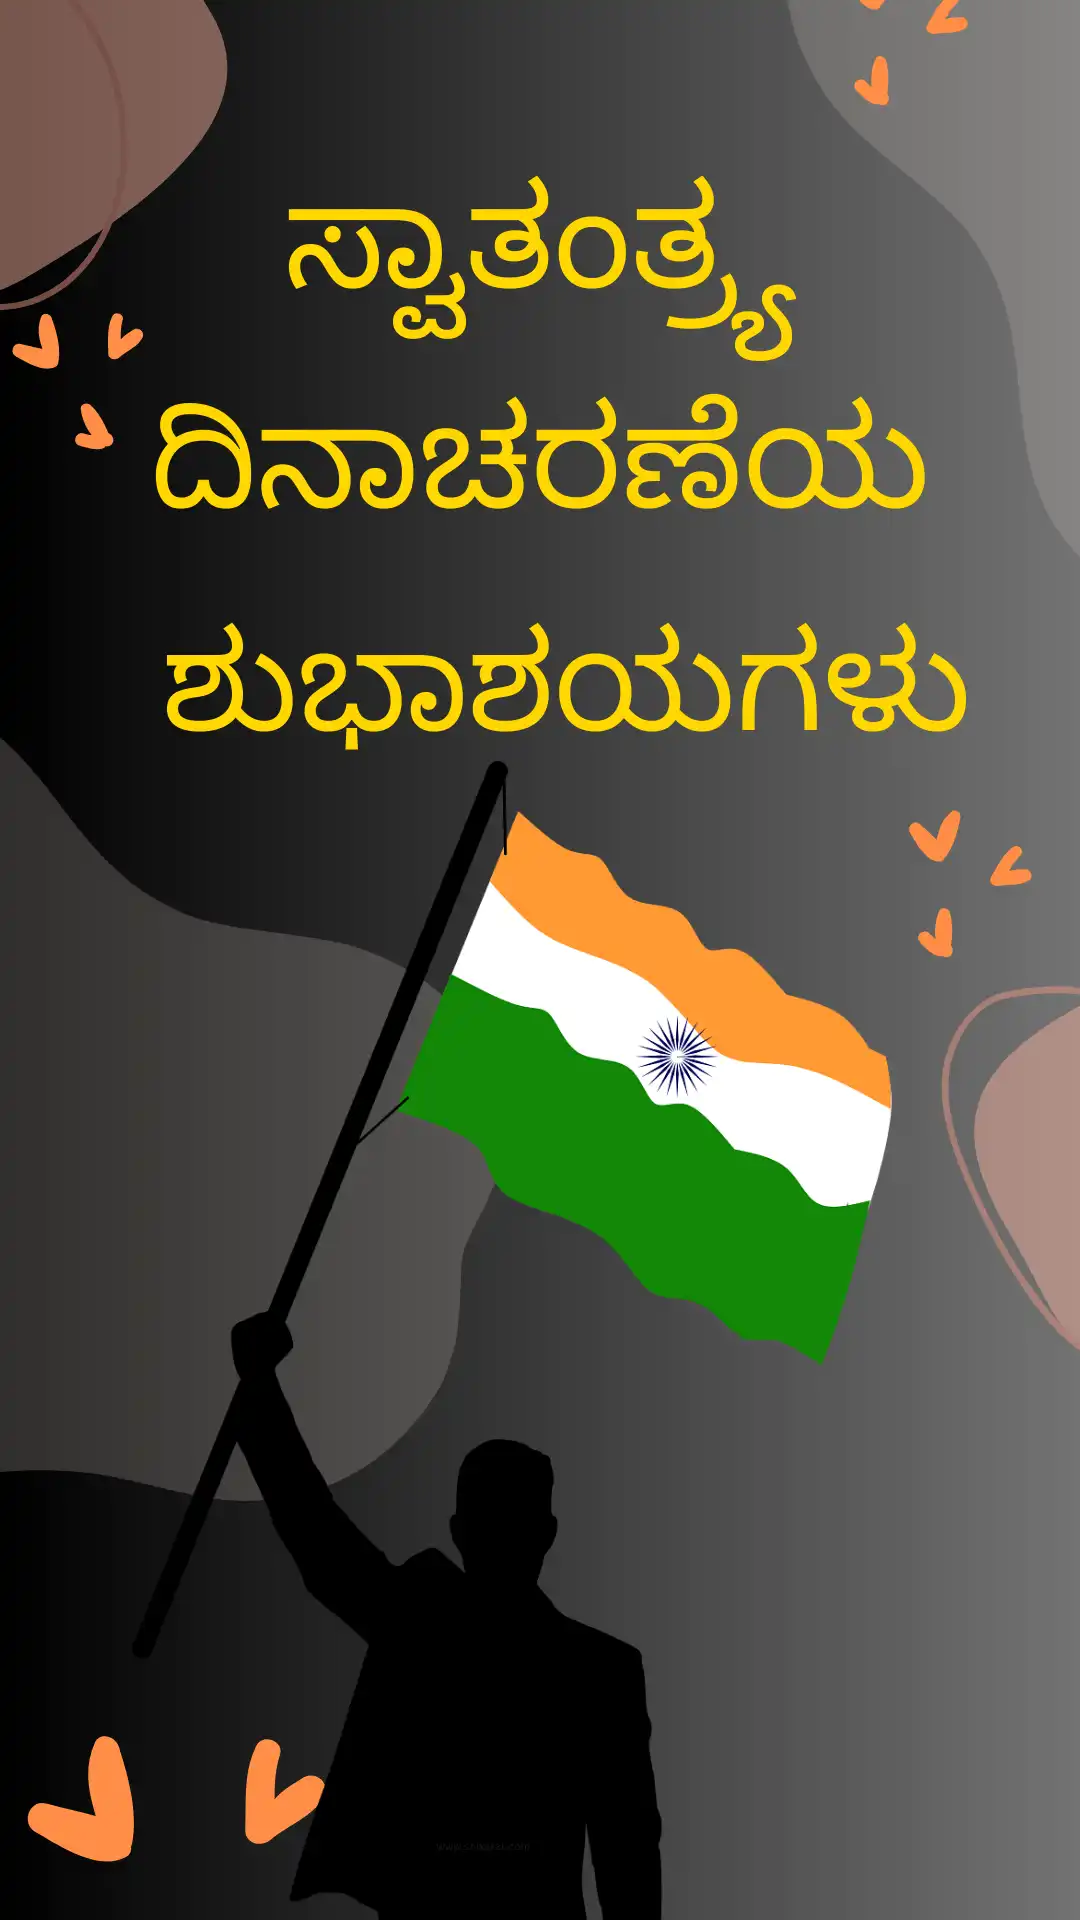 Independence Day wishes in Kannada whatsapp image